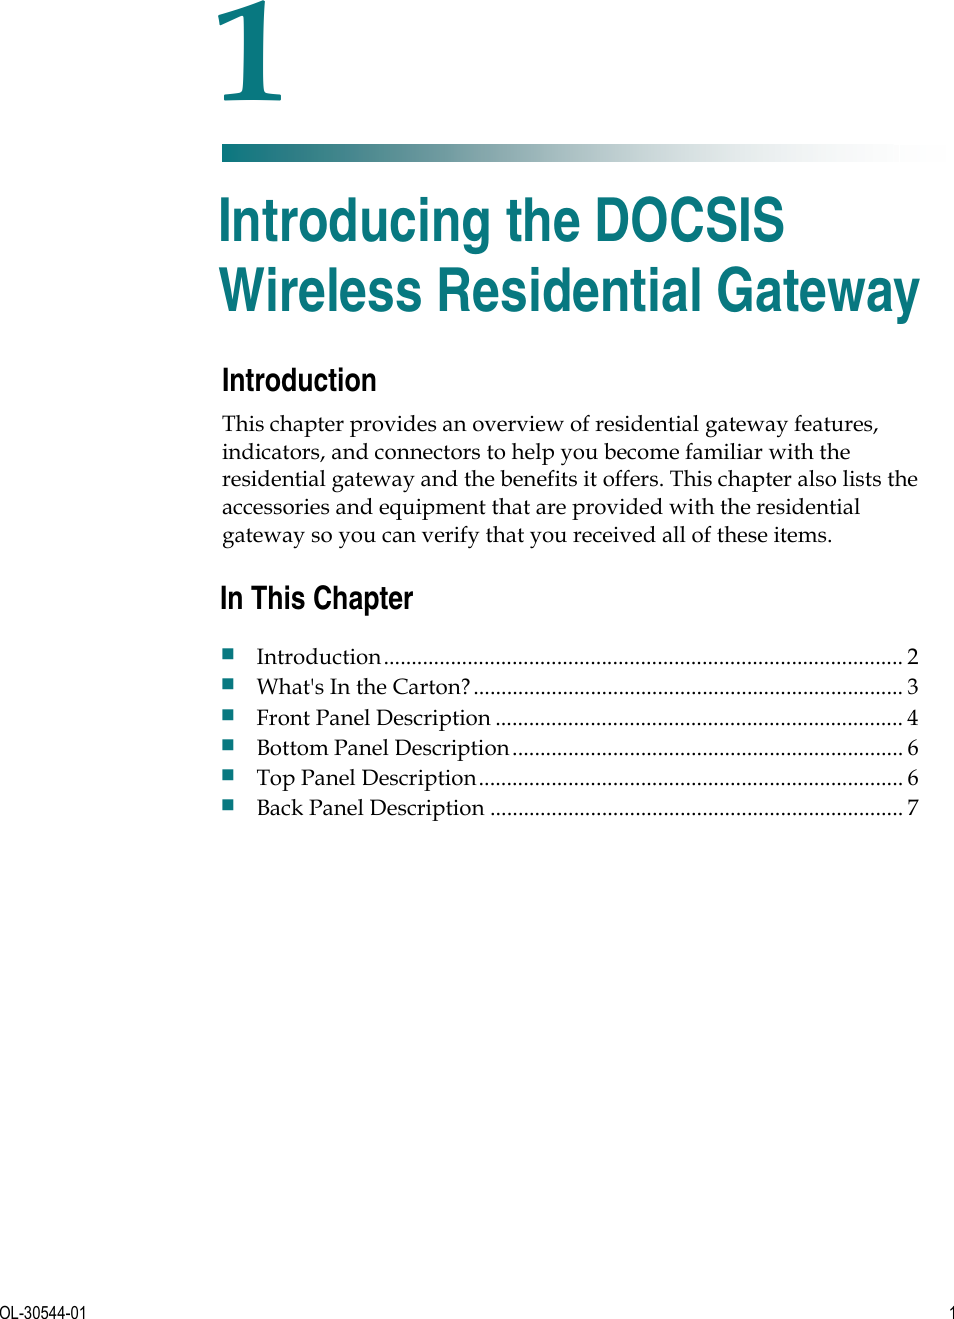   OL-30544-01  1  Introduction This chapter provides an overview of residential gateway features, indicators, and connectors to help you become familiar with the residential gateway and the benefits it offers. This chapter also lists the accessories and equipment that are provided with the residential gateway so you can verify that you received all of these items.    1 Chapter 1 Introducing the DOCSIS Wireless Residential Gateway In This Chapter Introduction............................................................................................. 2 What&apos;s In the Carton?............................................................................. 3 Front Panel Description ......................................................................... 4 Bottom Panel Description...................................................................... 6 Top Panel Description............................................................................ 6 Back Panel Description .......................................................................... 7 